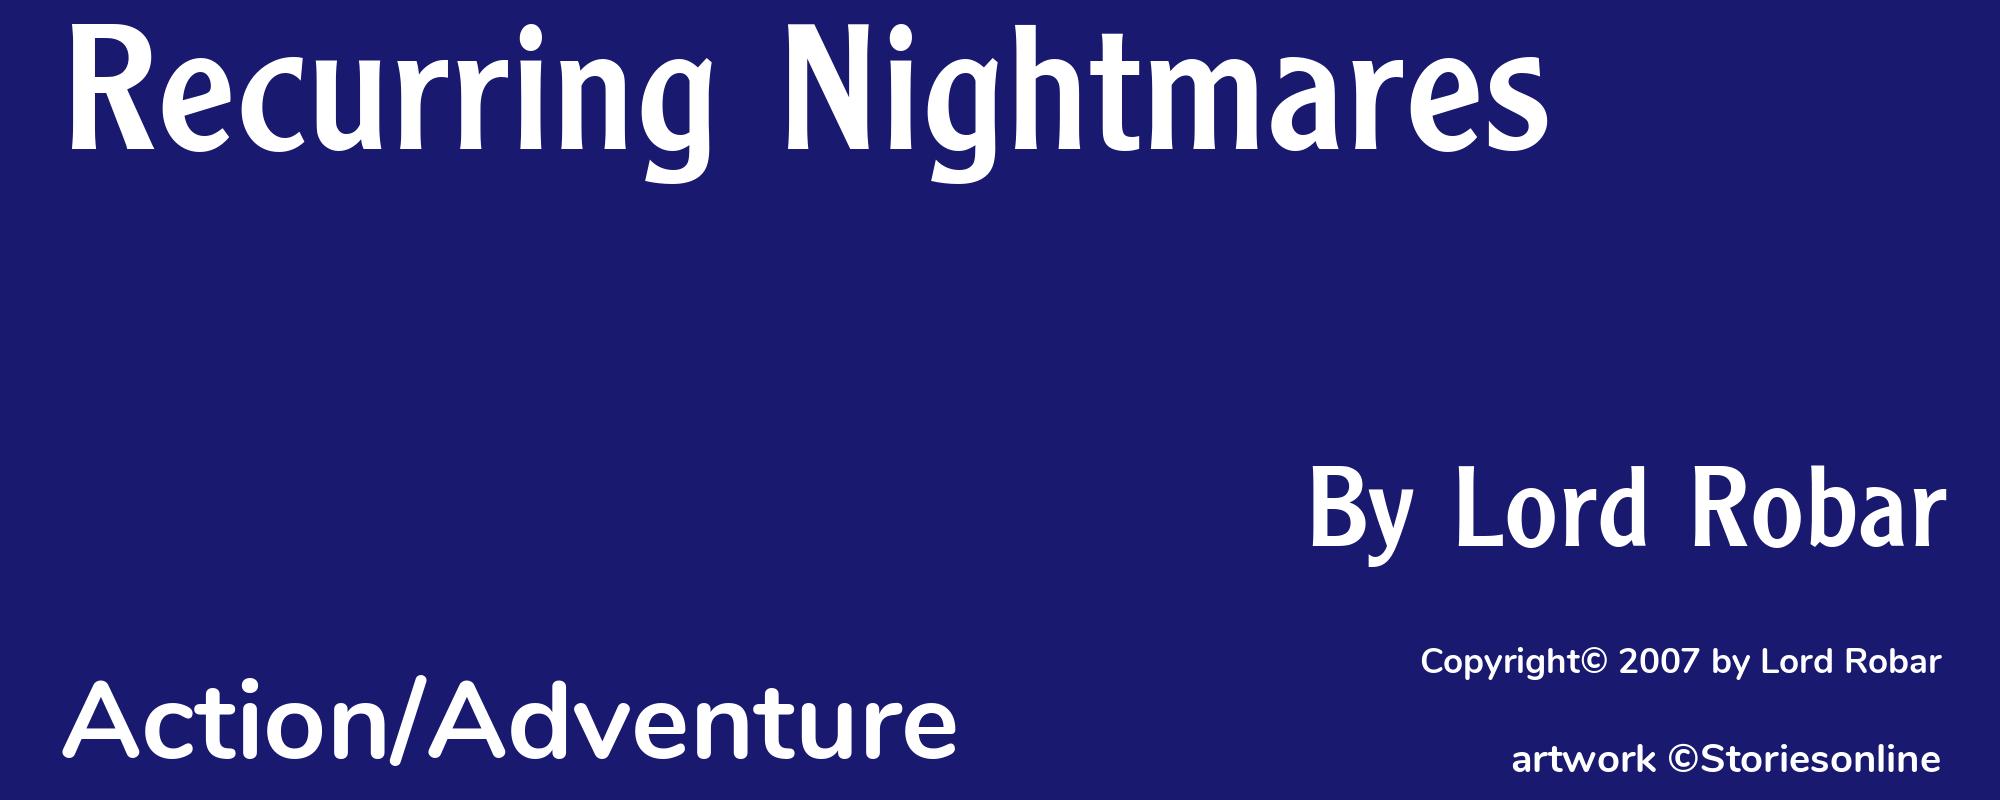 Recurring Nightmares - Cover